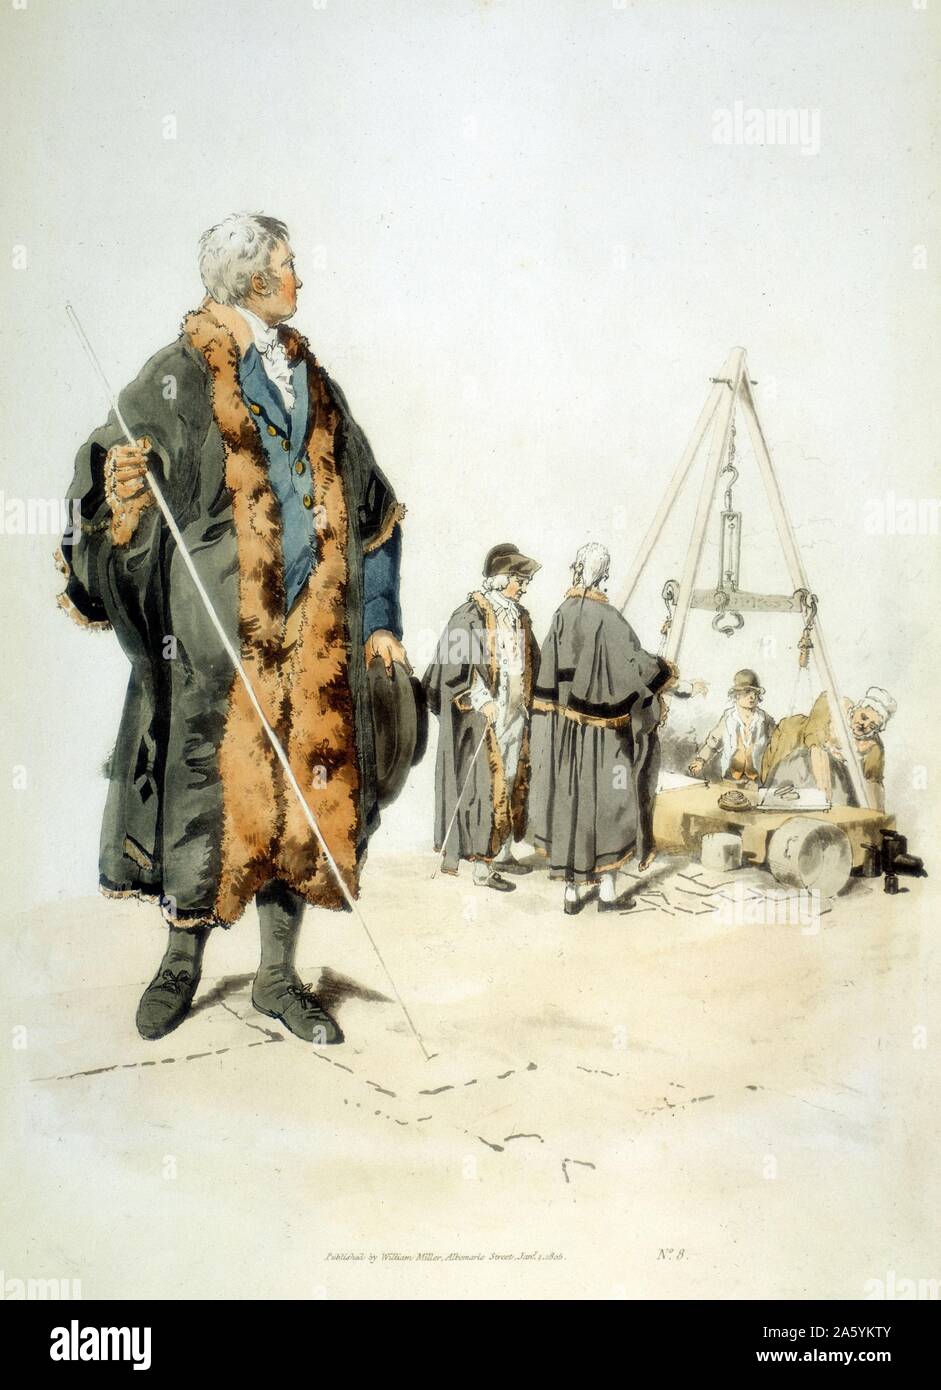 Member of a London Wardmote Inquest in official dress. These bodies checked weights and measures for accuracey. From William Henry Pyne 'Costume of Great Britain', London, 1808. Colour Stock Photo